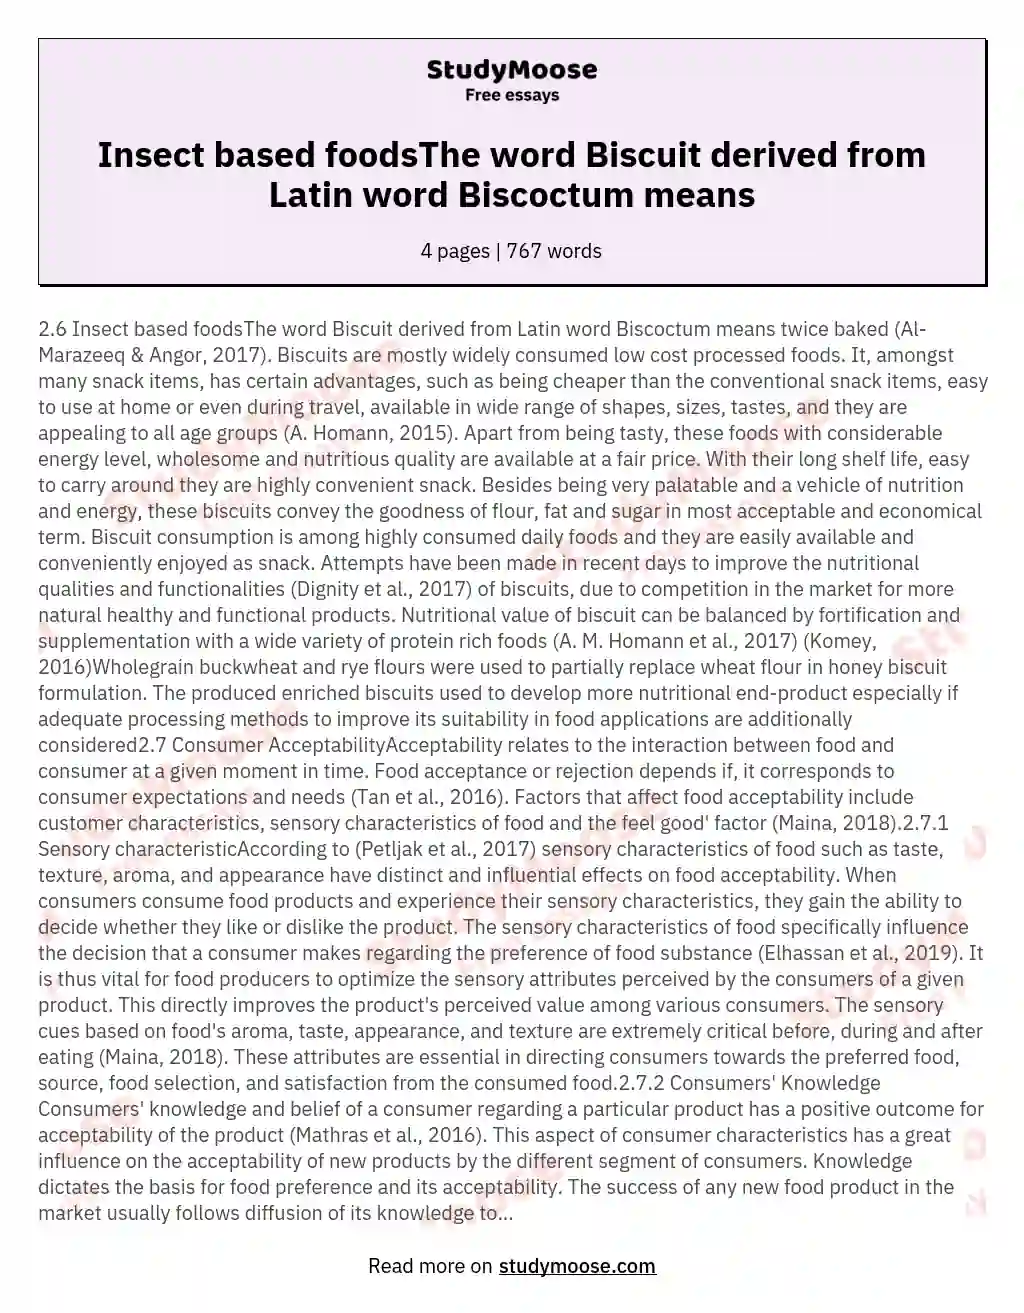 Insect based foodsThe word Biscuit derived from Latin word Biscoctum means